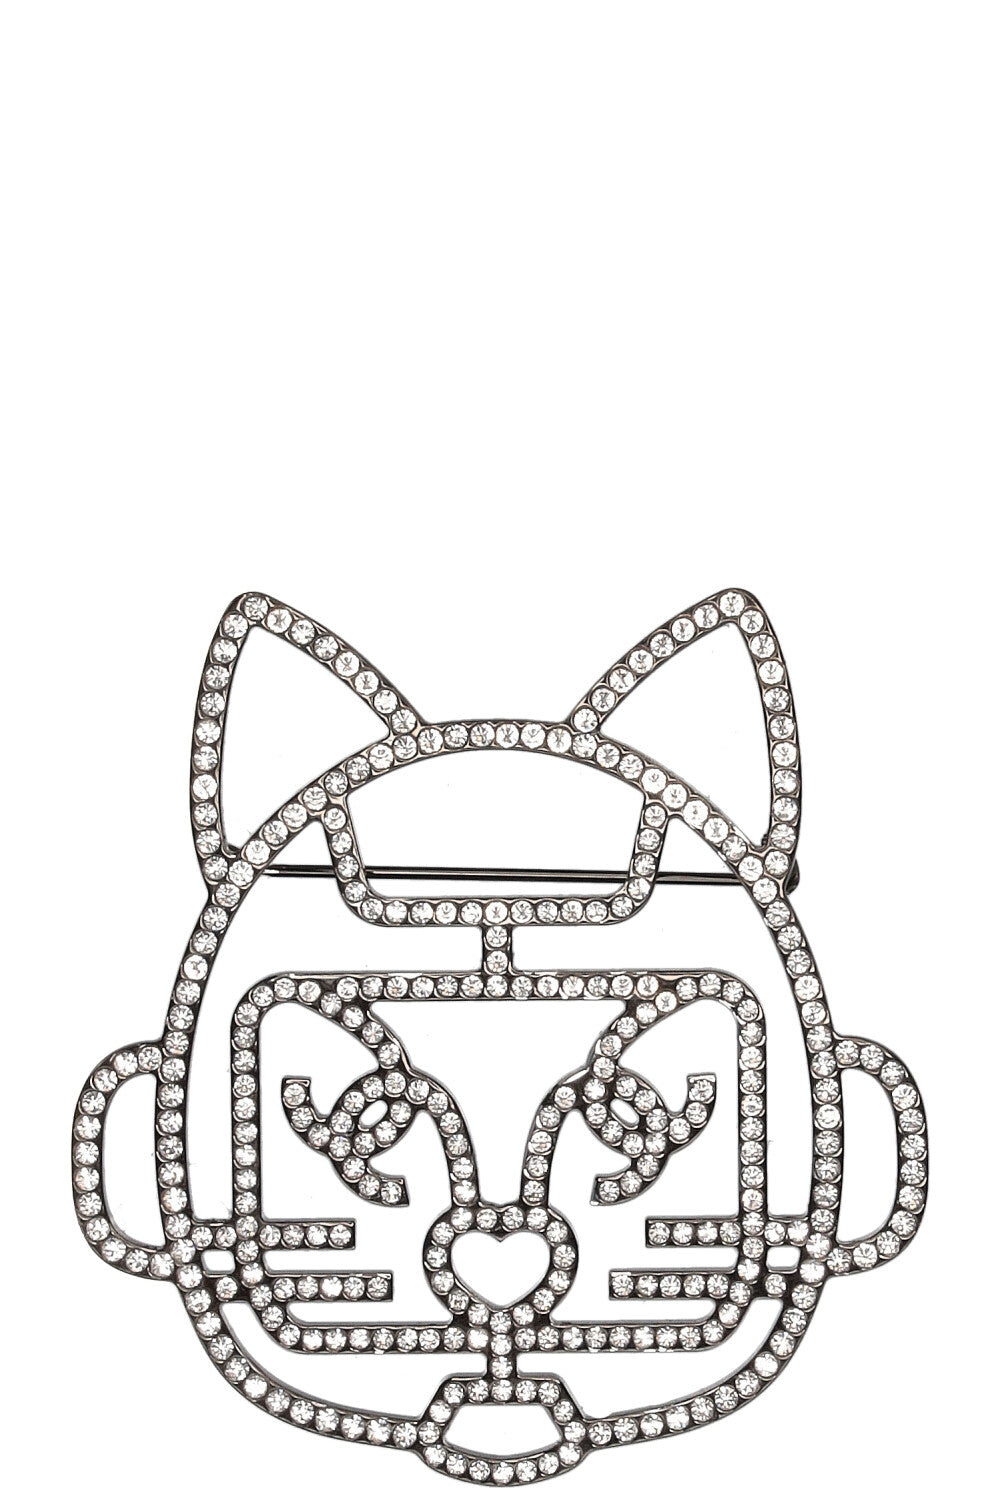 CHANEL Choupette Brooch Black Crystals